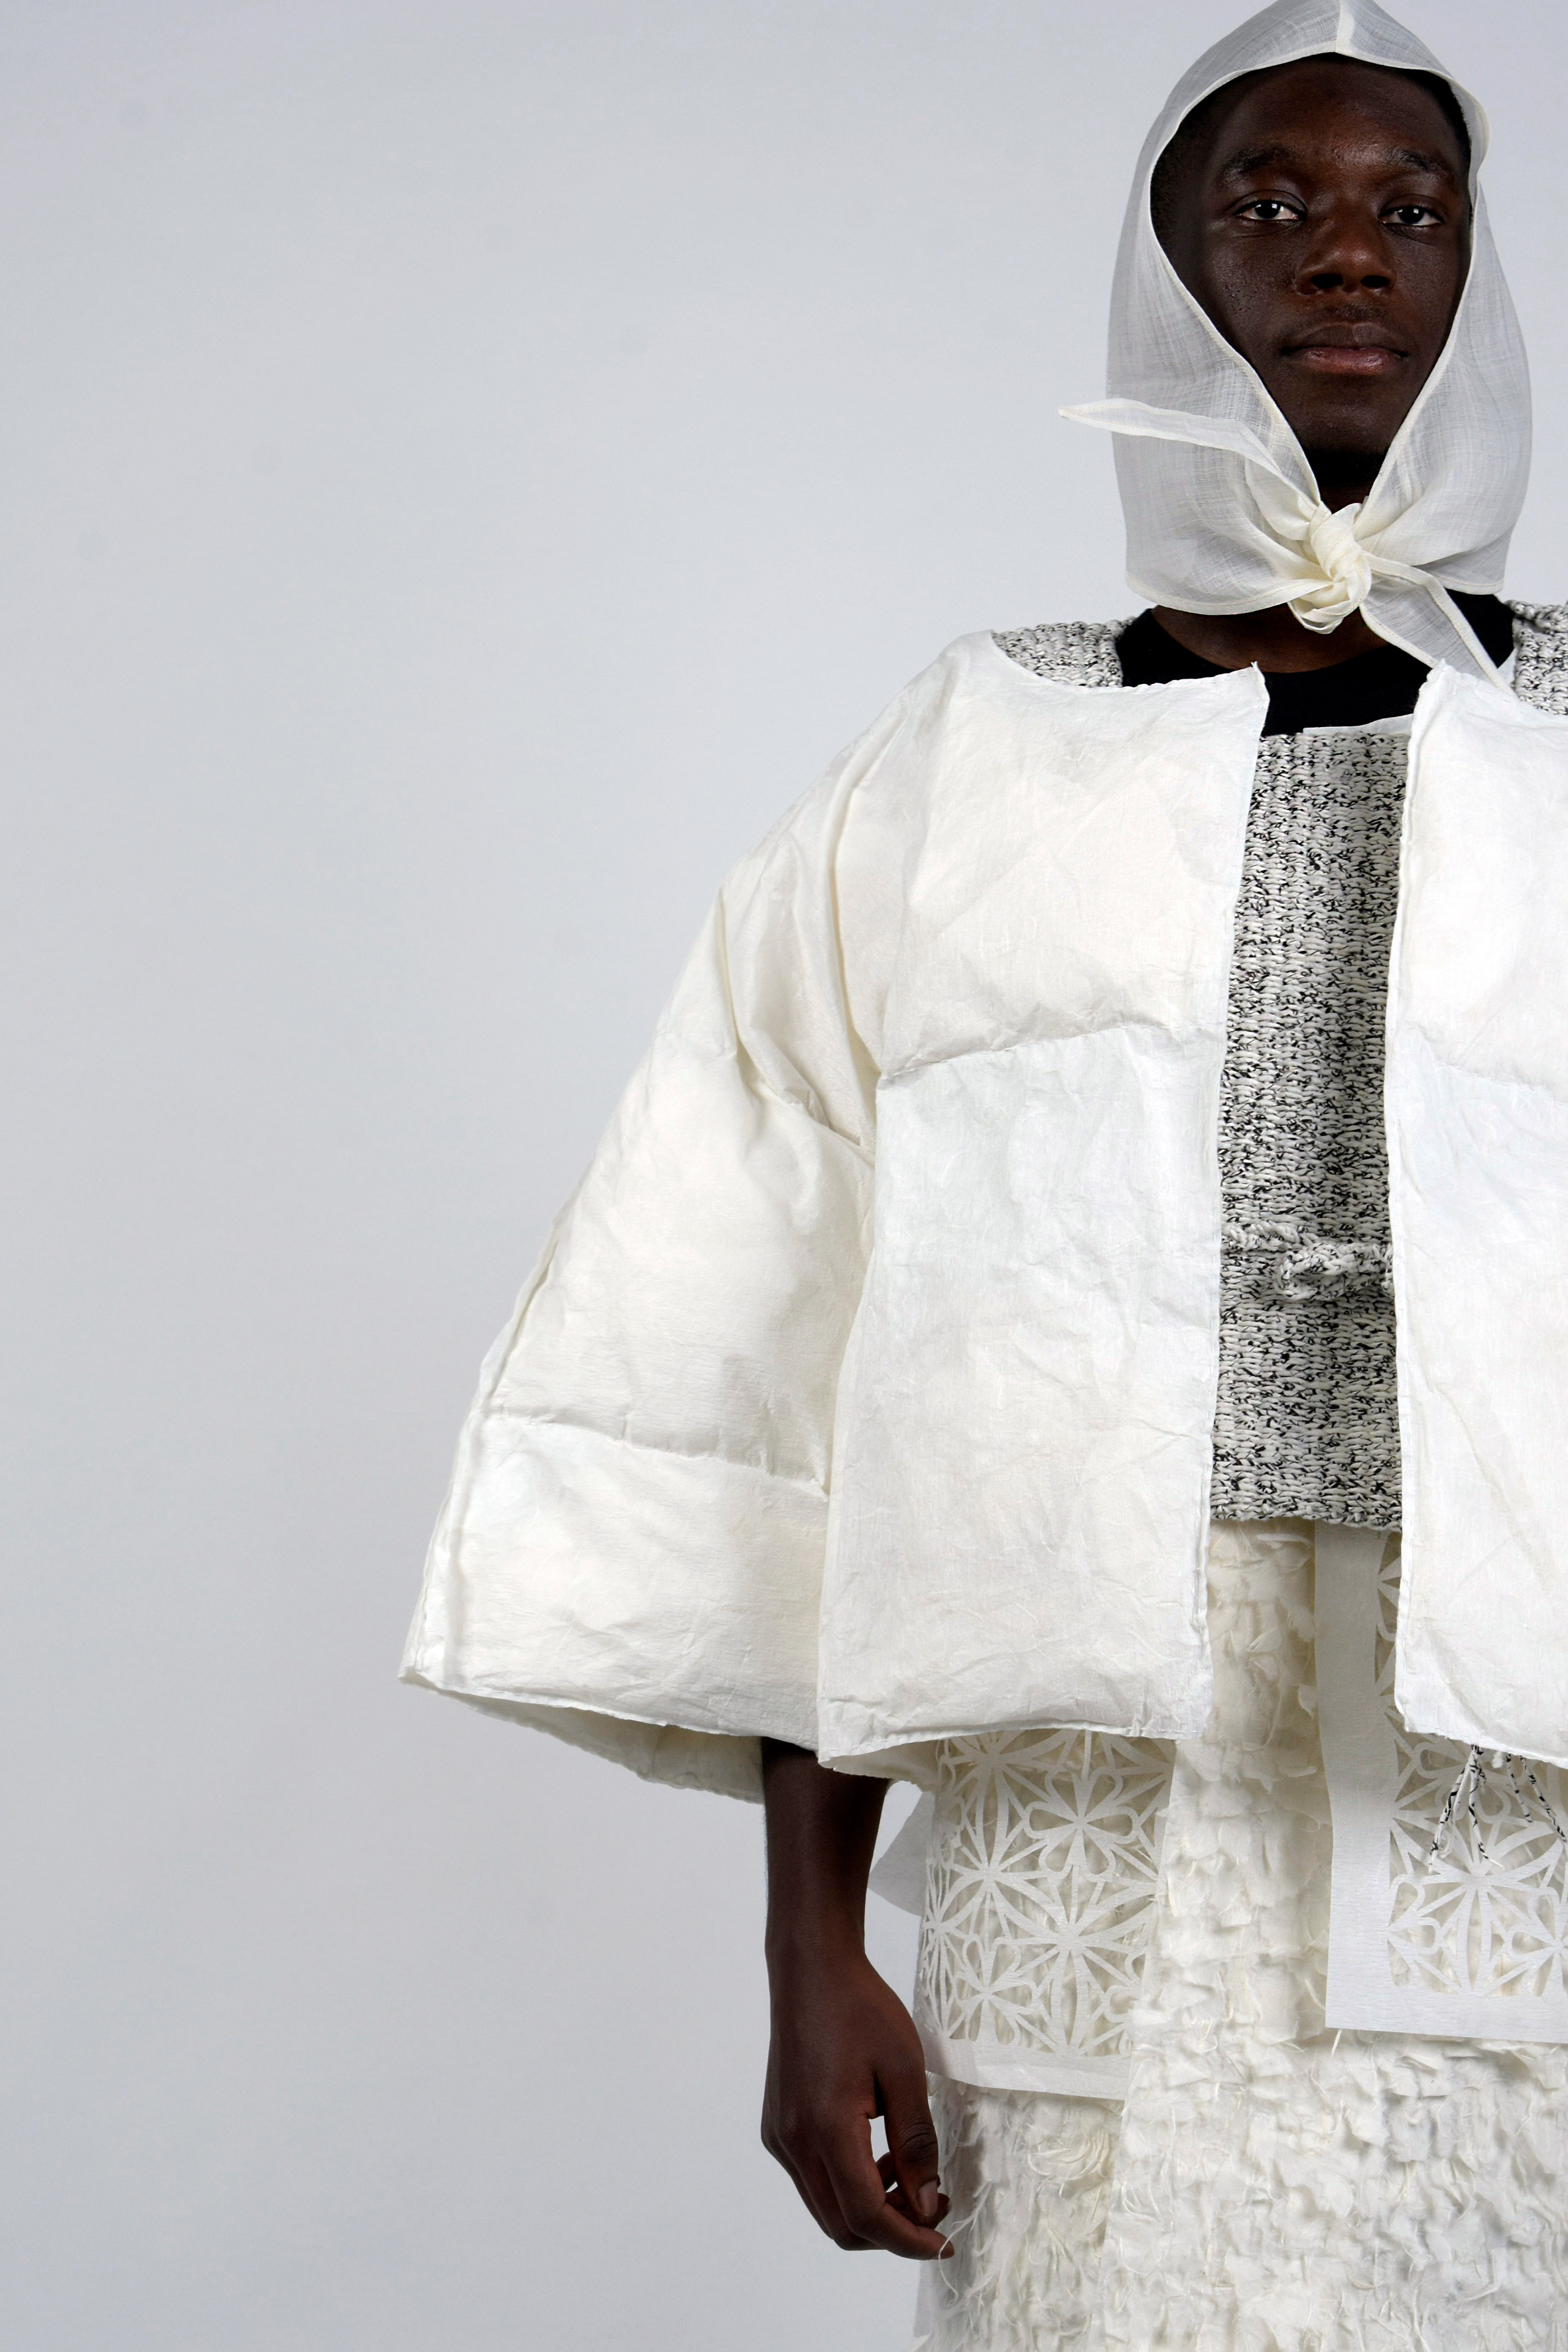 Clothing from traditional Korean paper - The Index Project